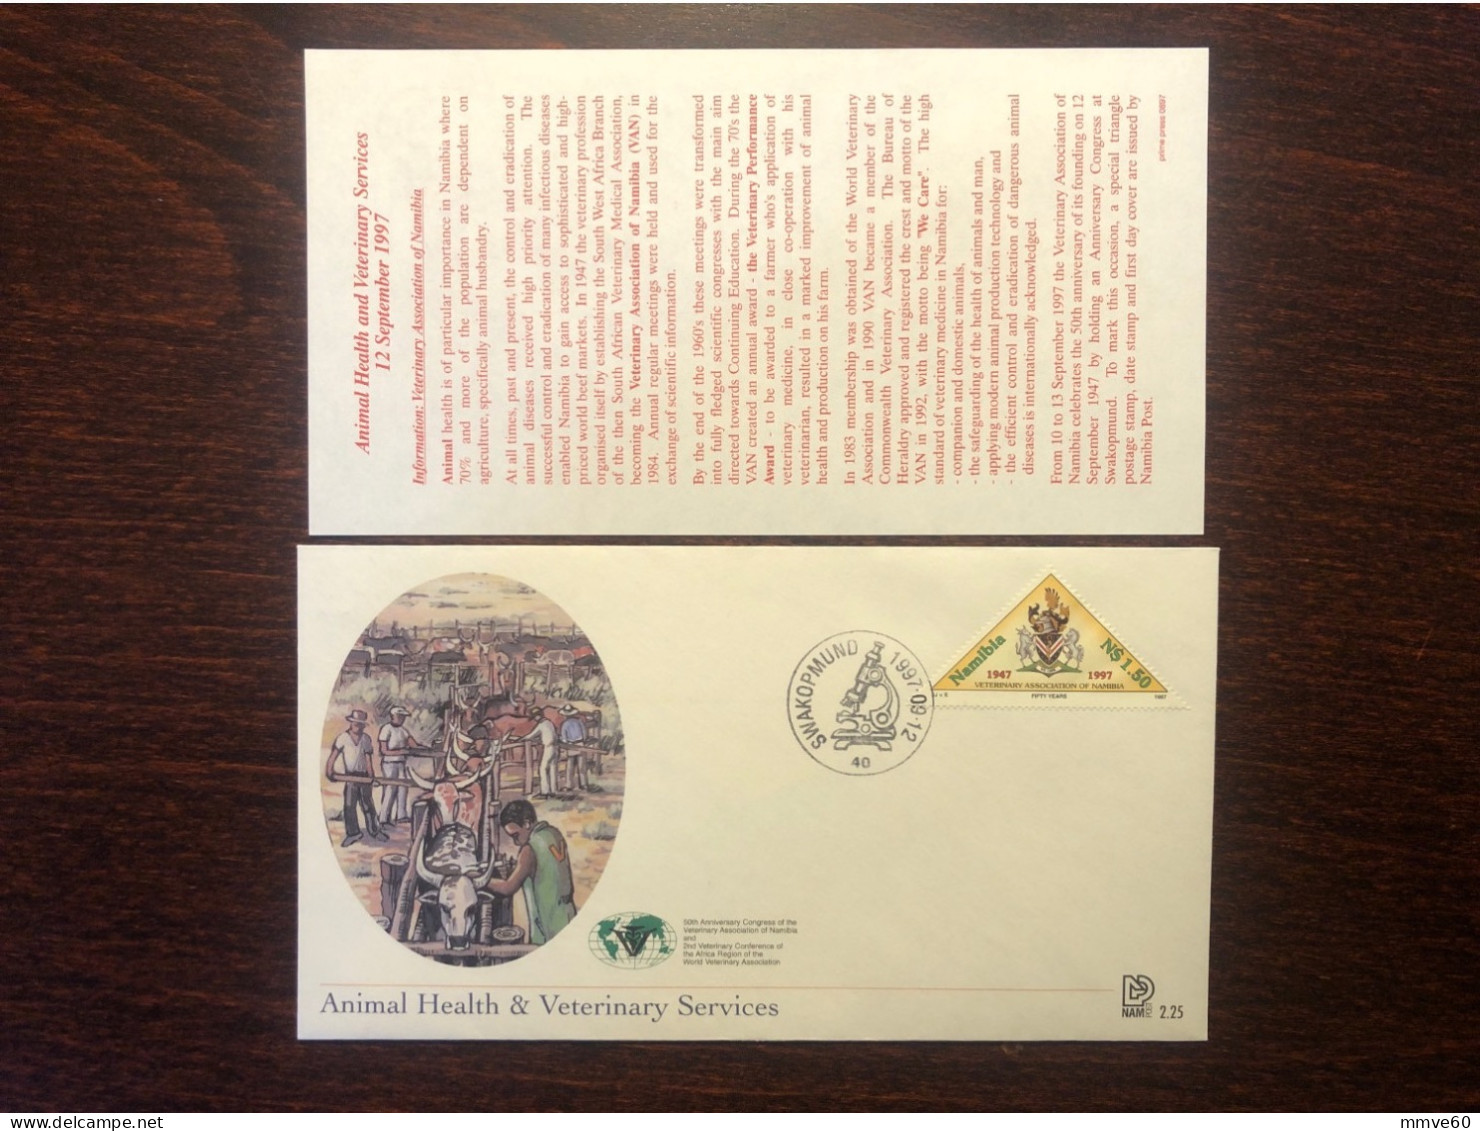 NAMIBIA FDC COVER 1997 YEAR VETERINARY HEALTH MEDICINE STAMPS - Namibia (1990- ...)